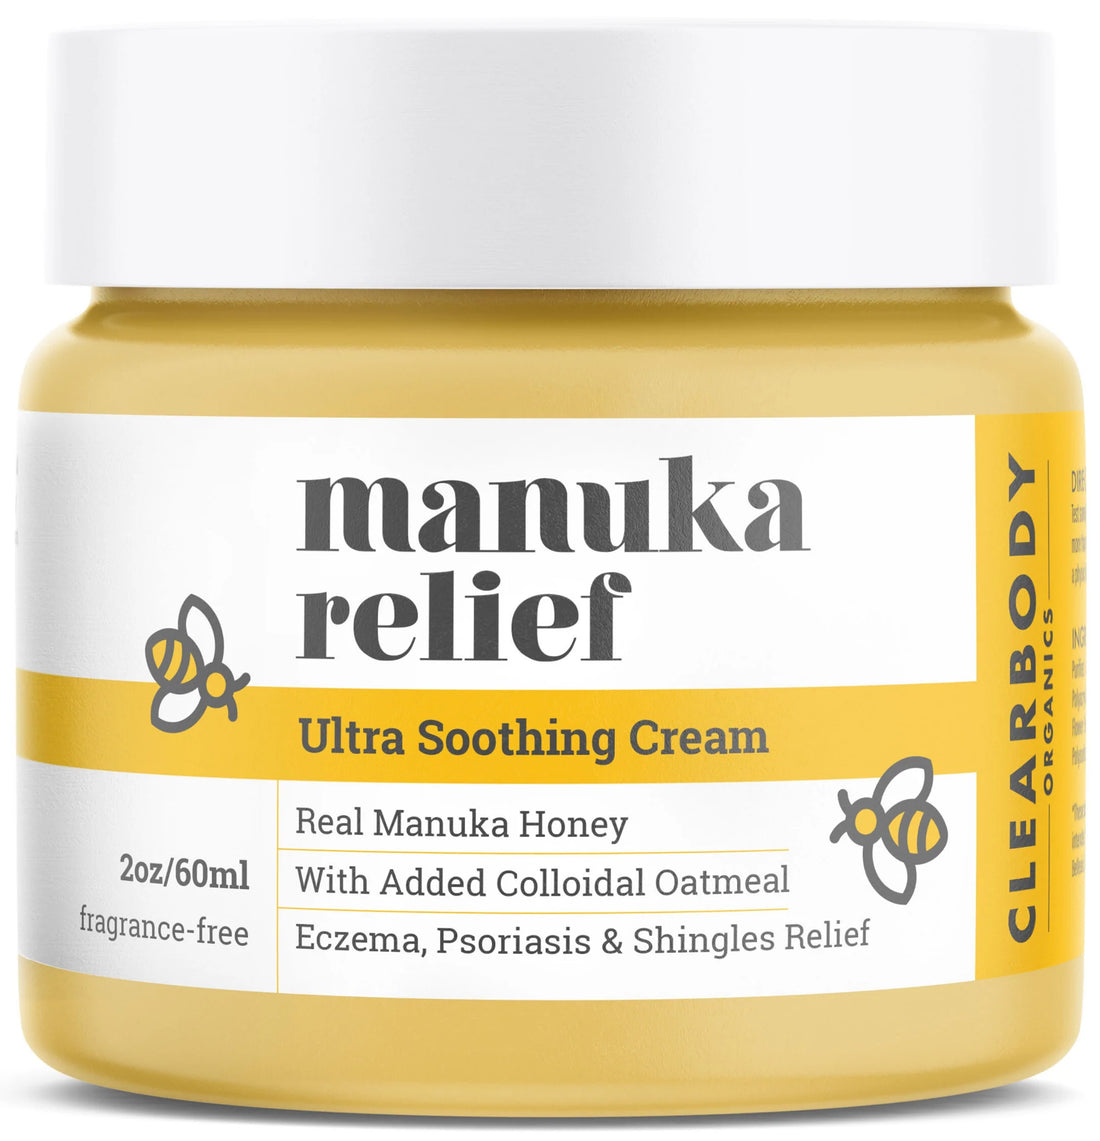 Finally found a product that fixes my eczema.....MANUKA HONEY RELIEF